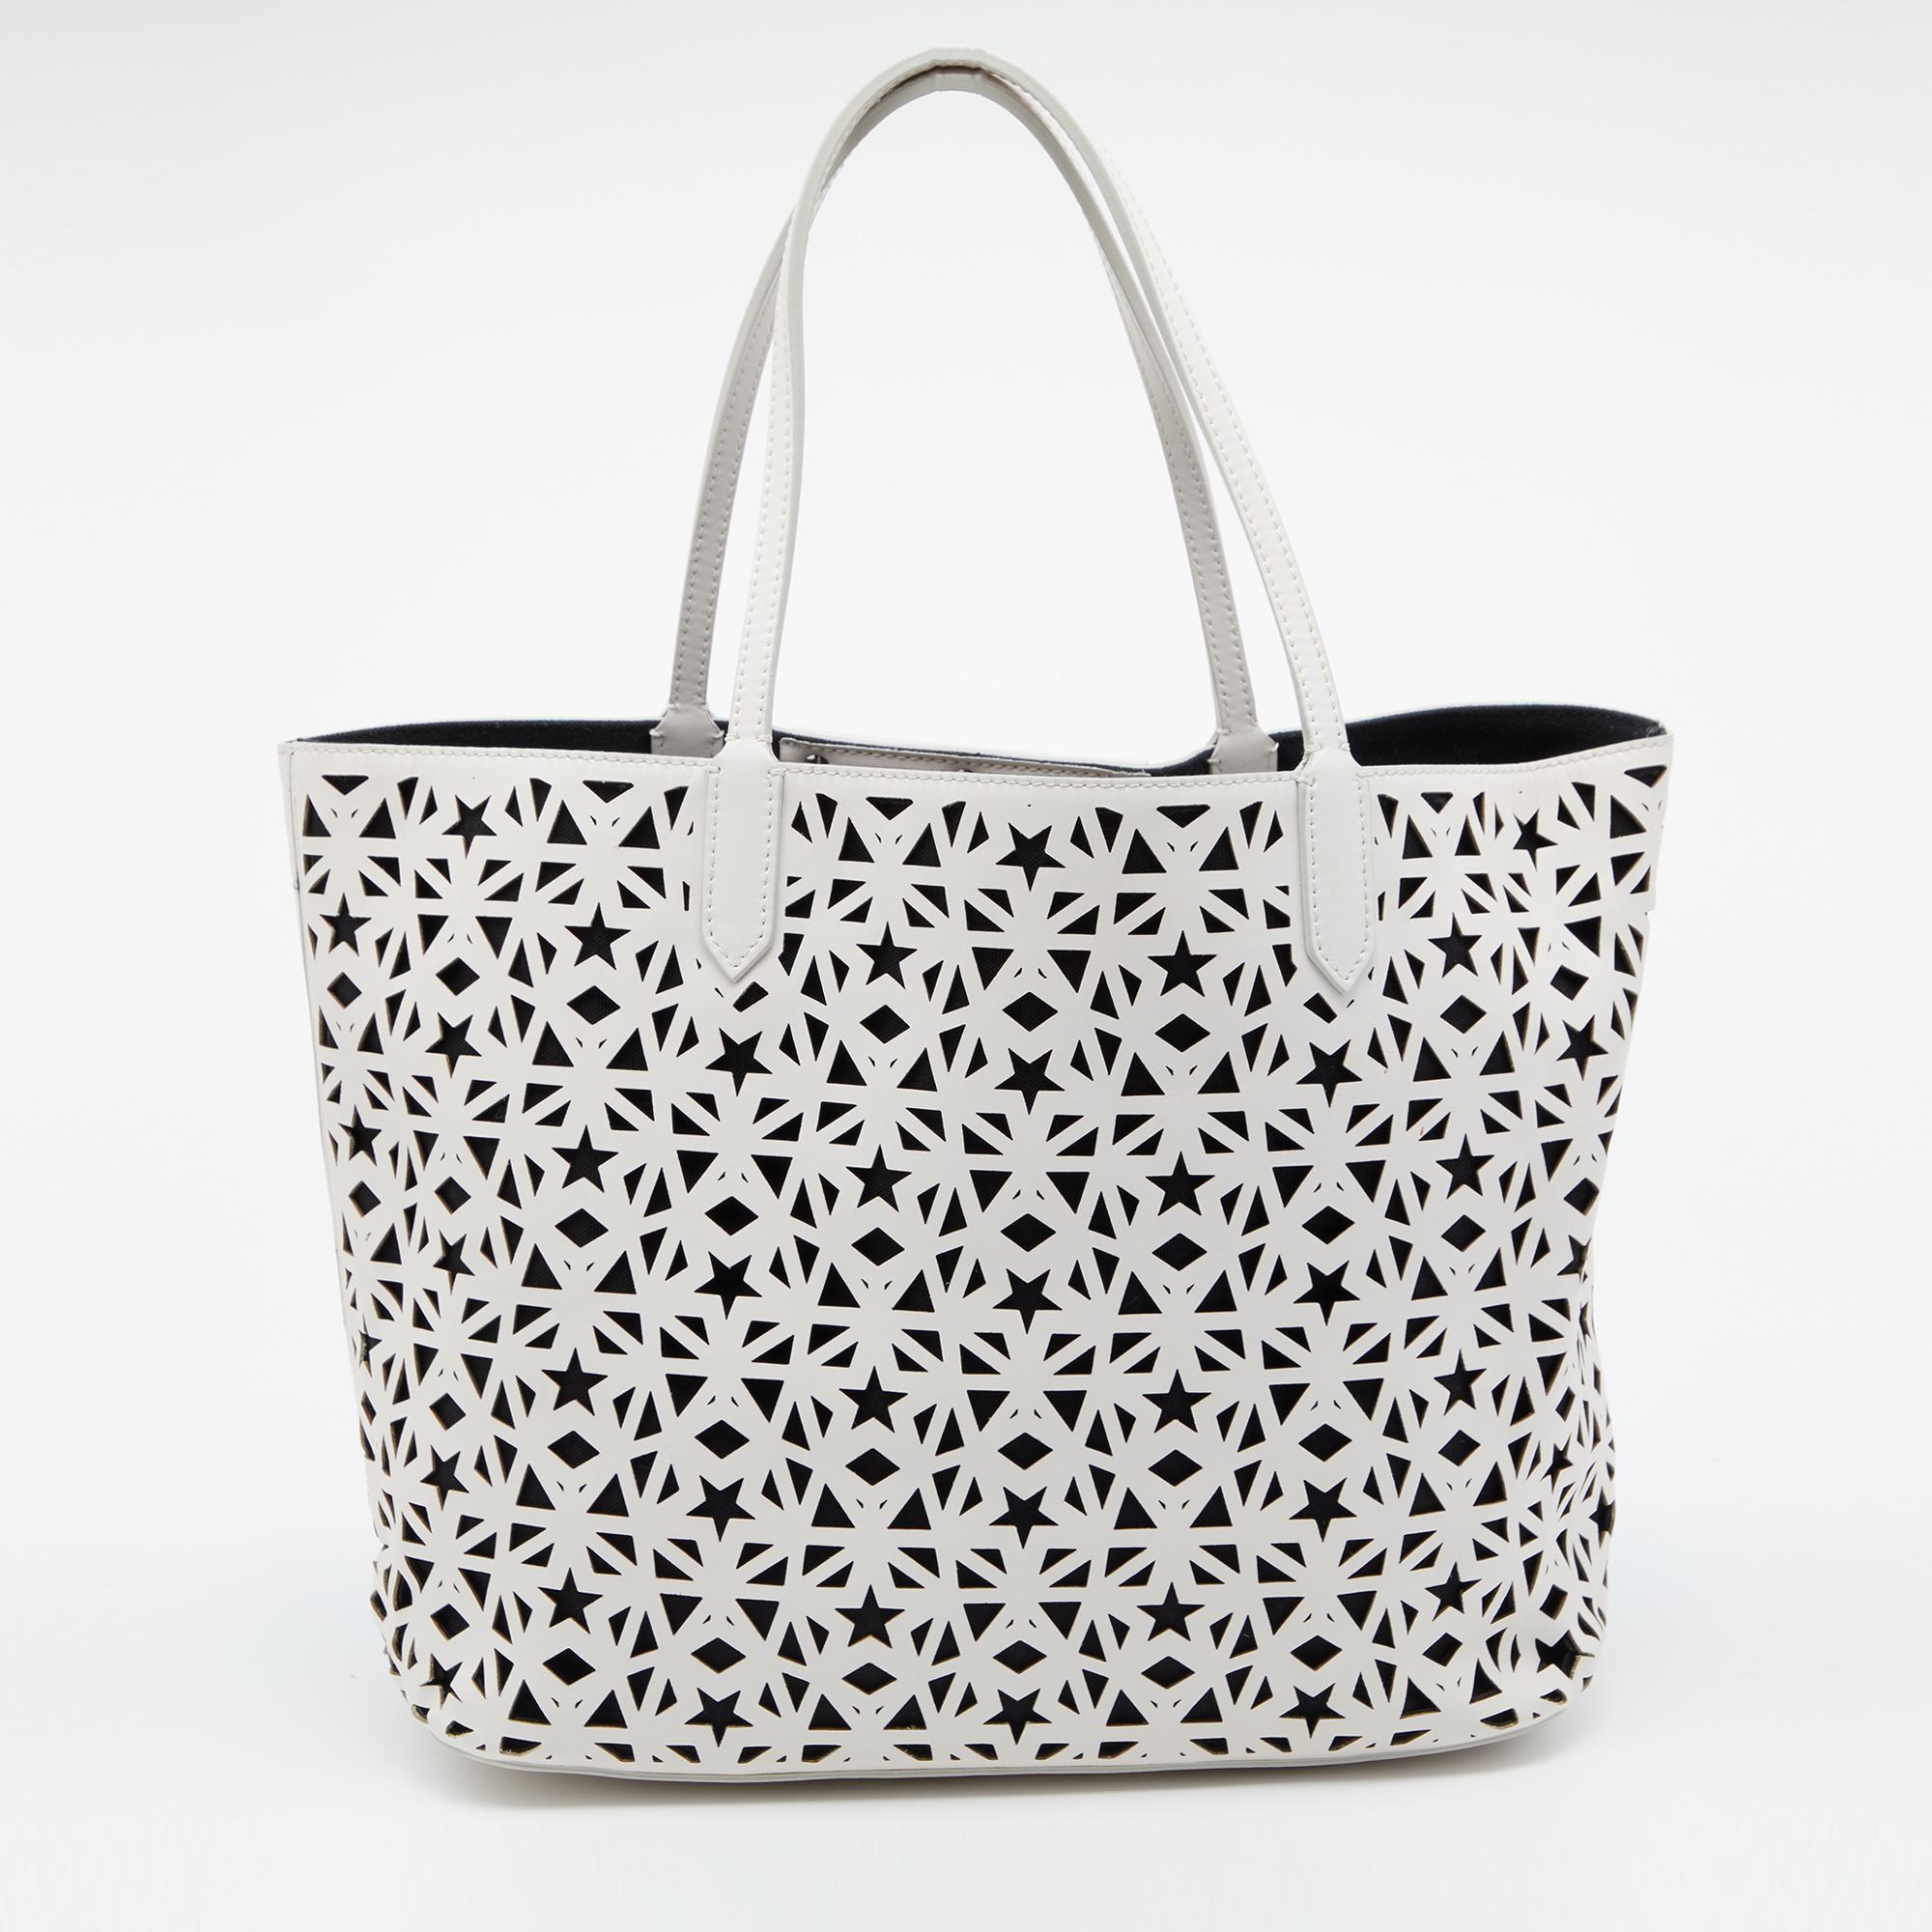 This designer tote from the House of Givenchy is super classy and functional, perfect for everyday use. It is made from perforated leather on the exterior with the label adorning the front. It has two handles.

